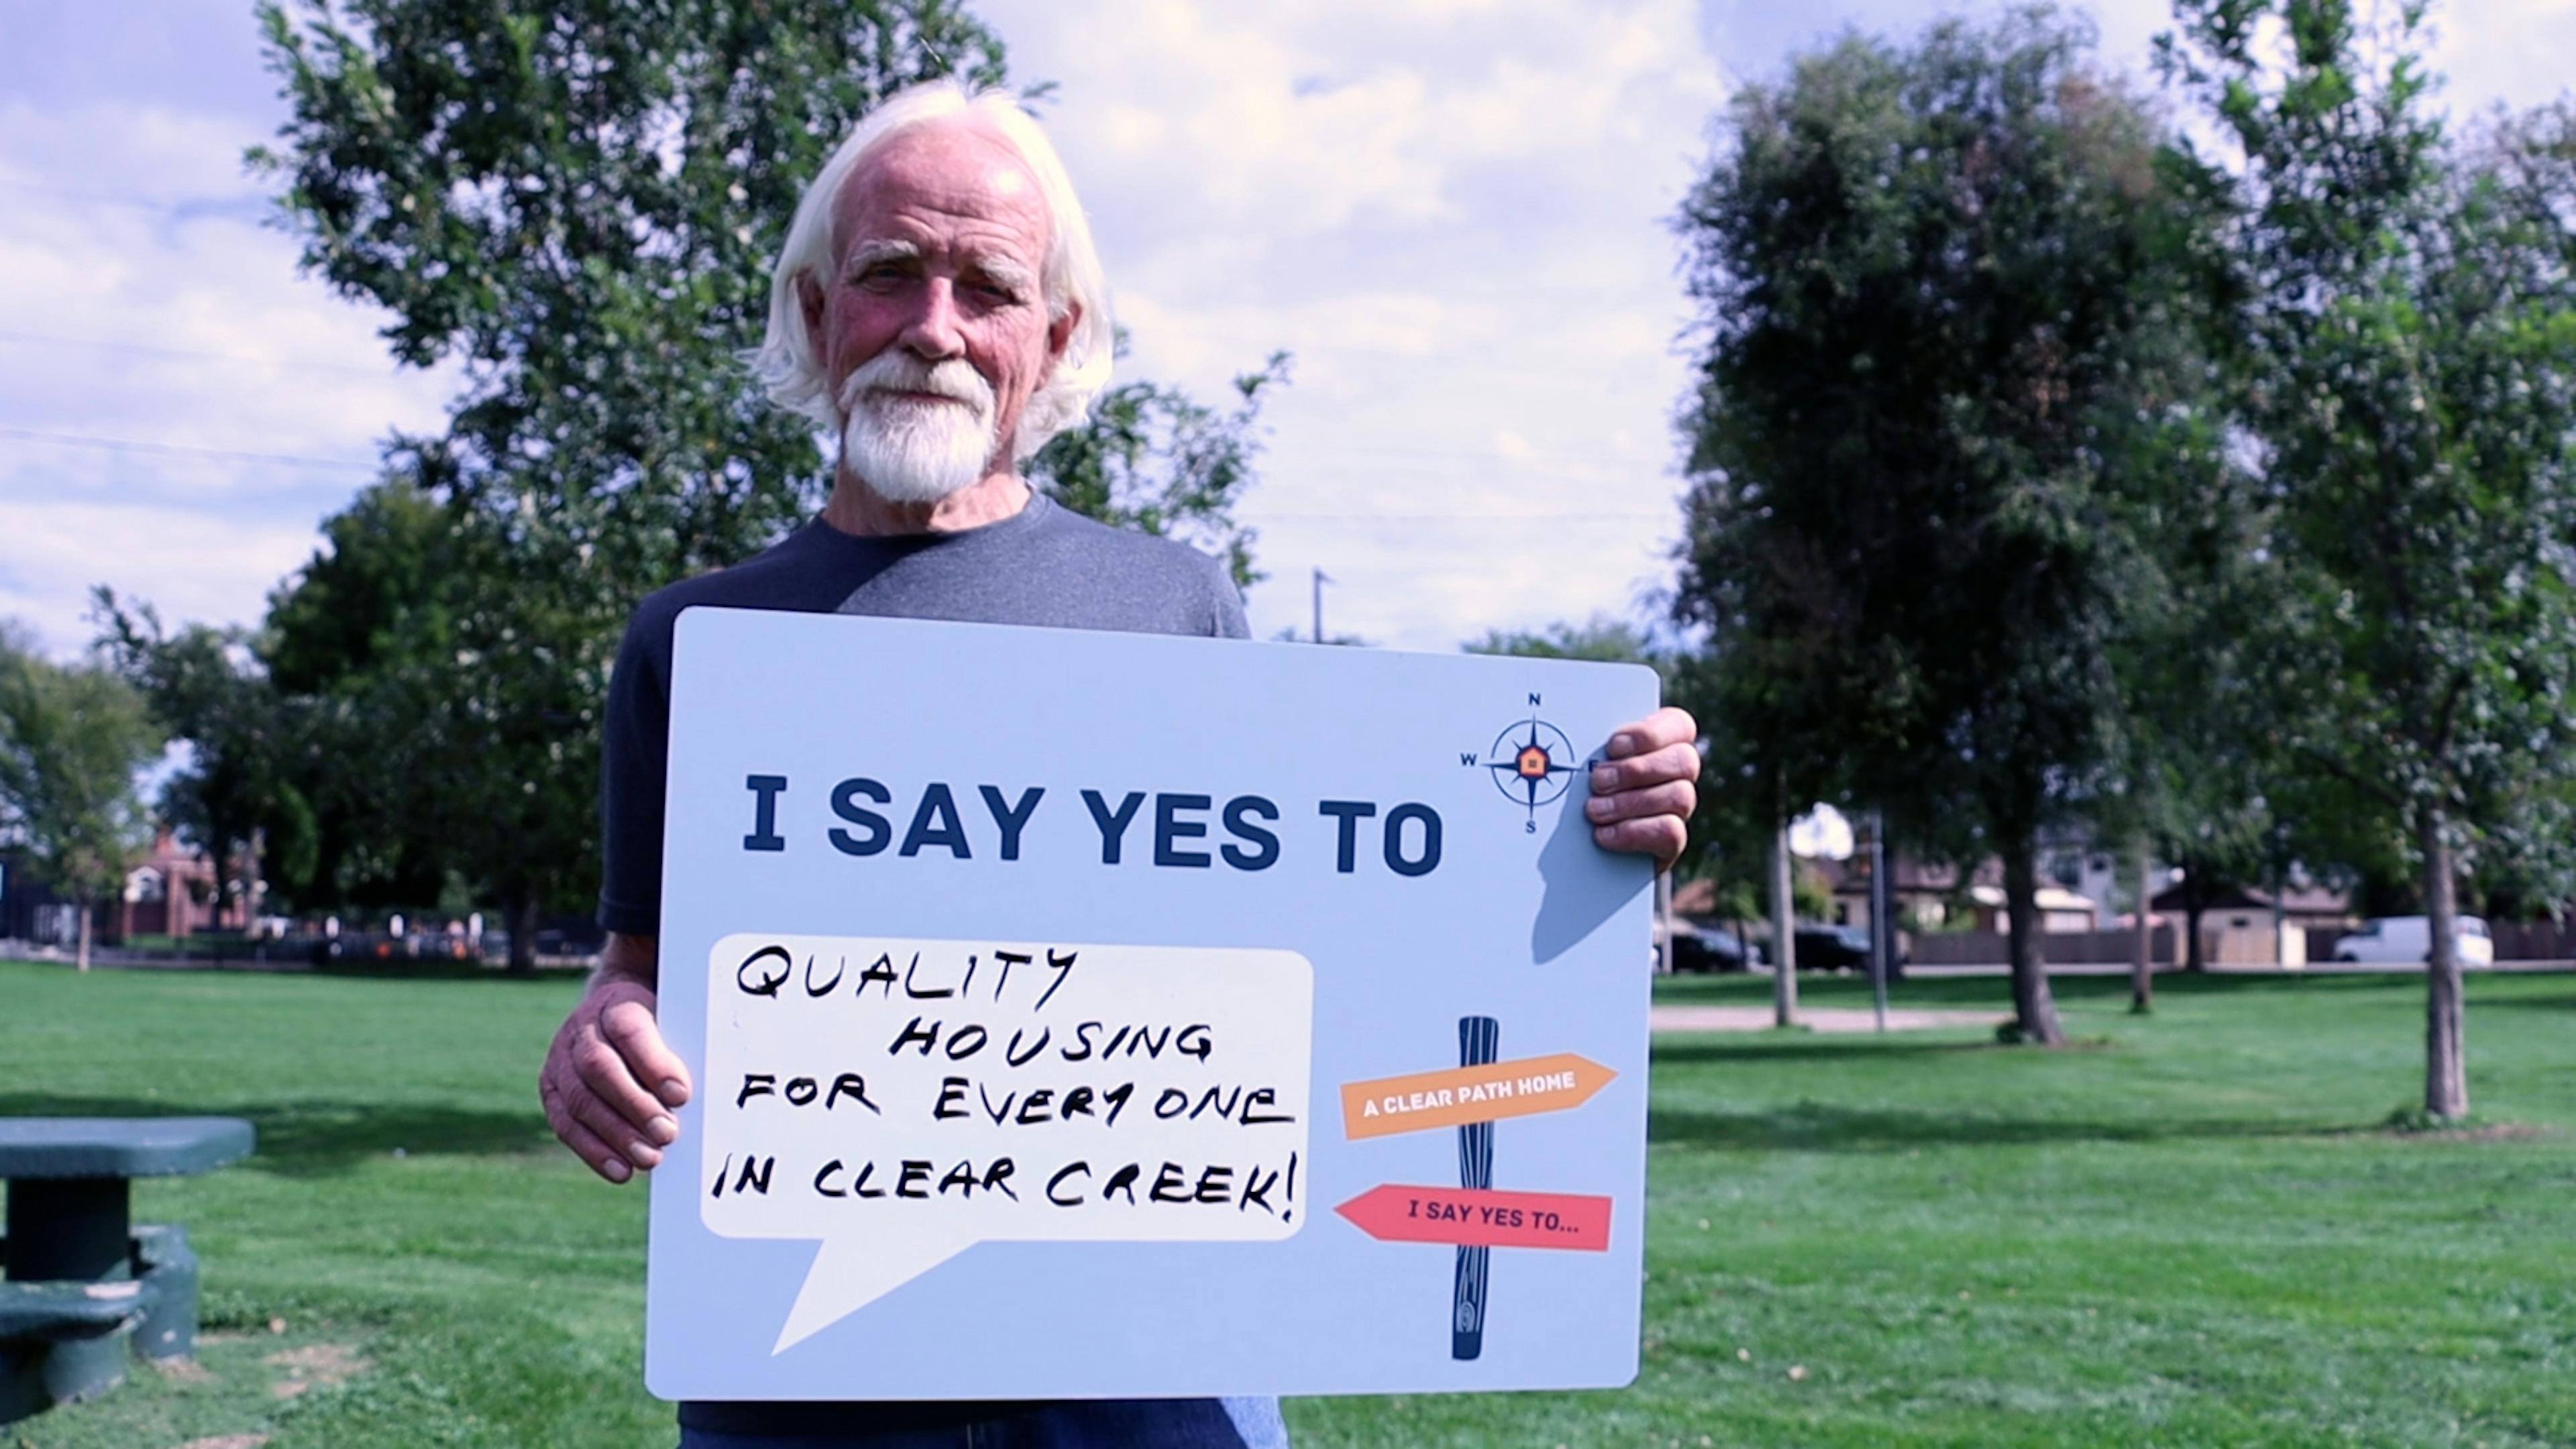 I Say Yes To... Quality Housing for Everyone in Clear Creek!